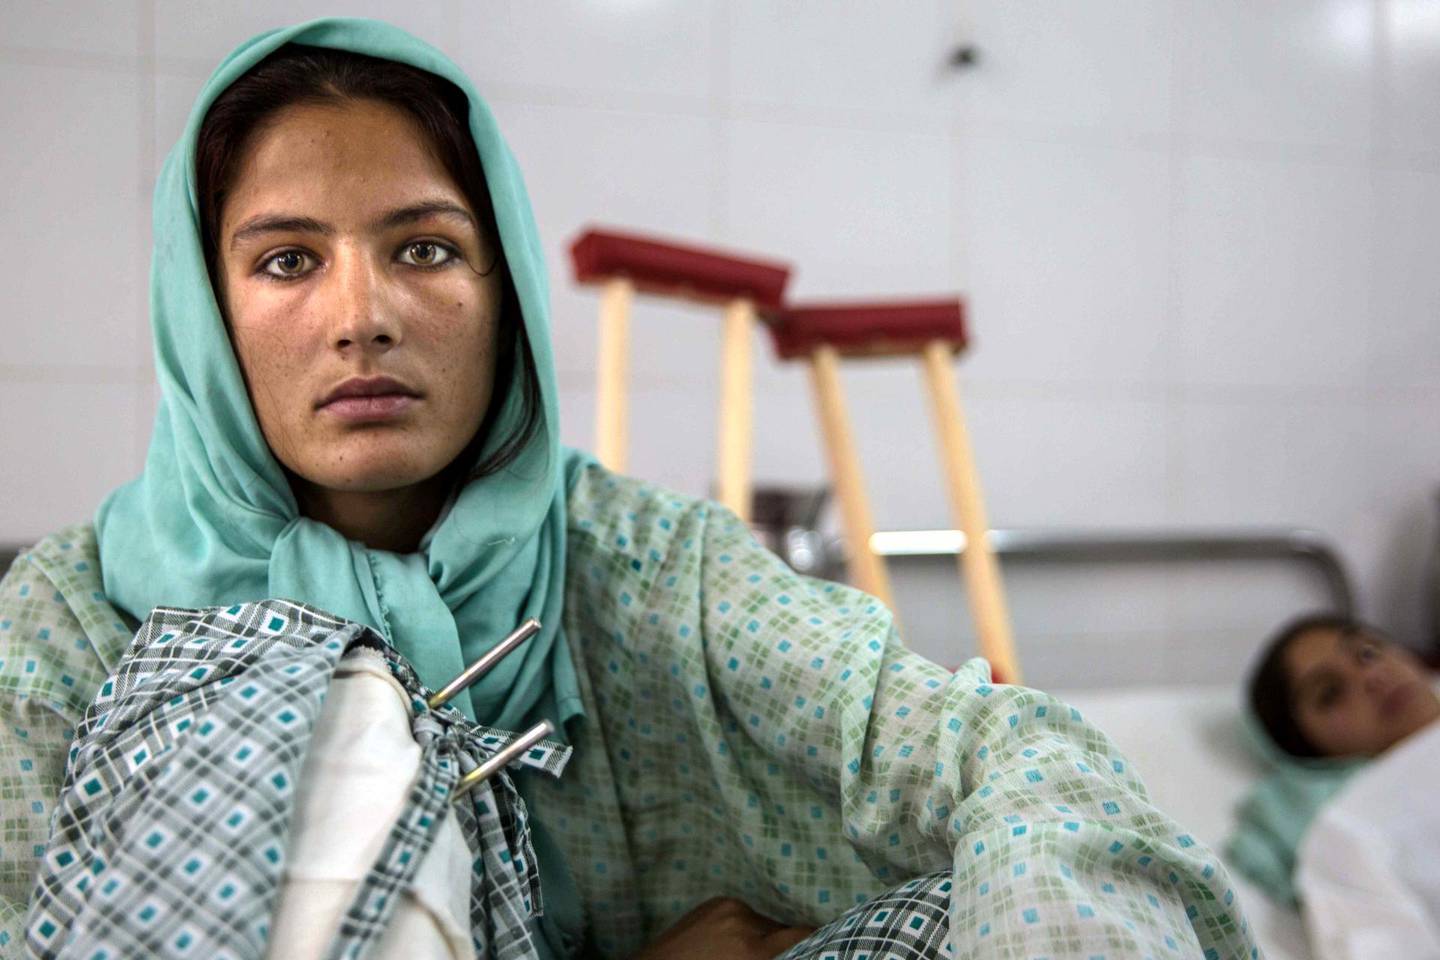 Razia, 16, recovers at the Emergency Hopsital in Helmand's provincial capital Lashkargar after she was injured in a blast. Photo by Stefanie Glinski